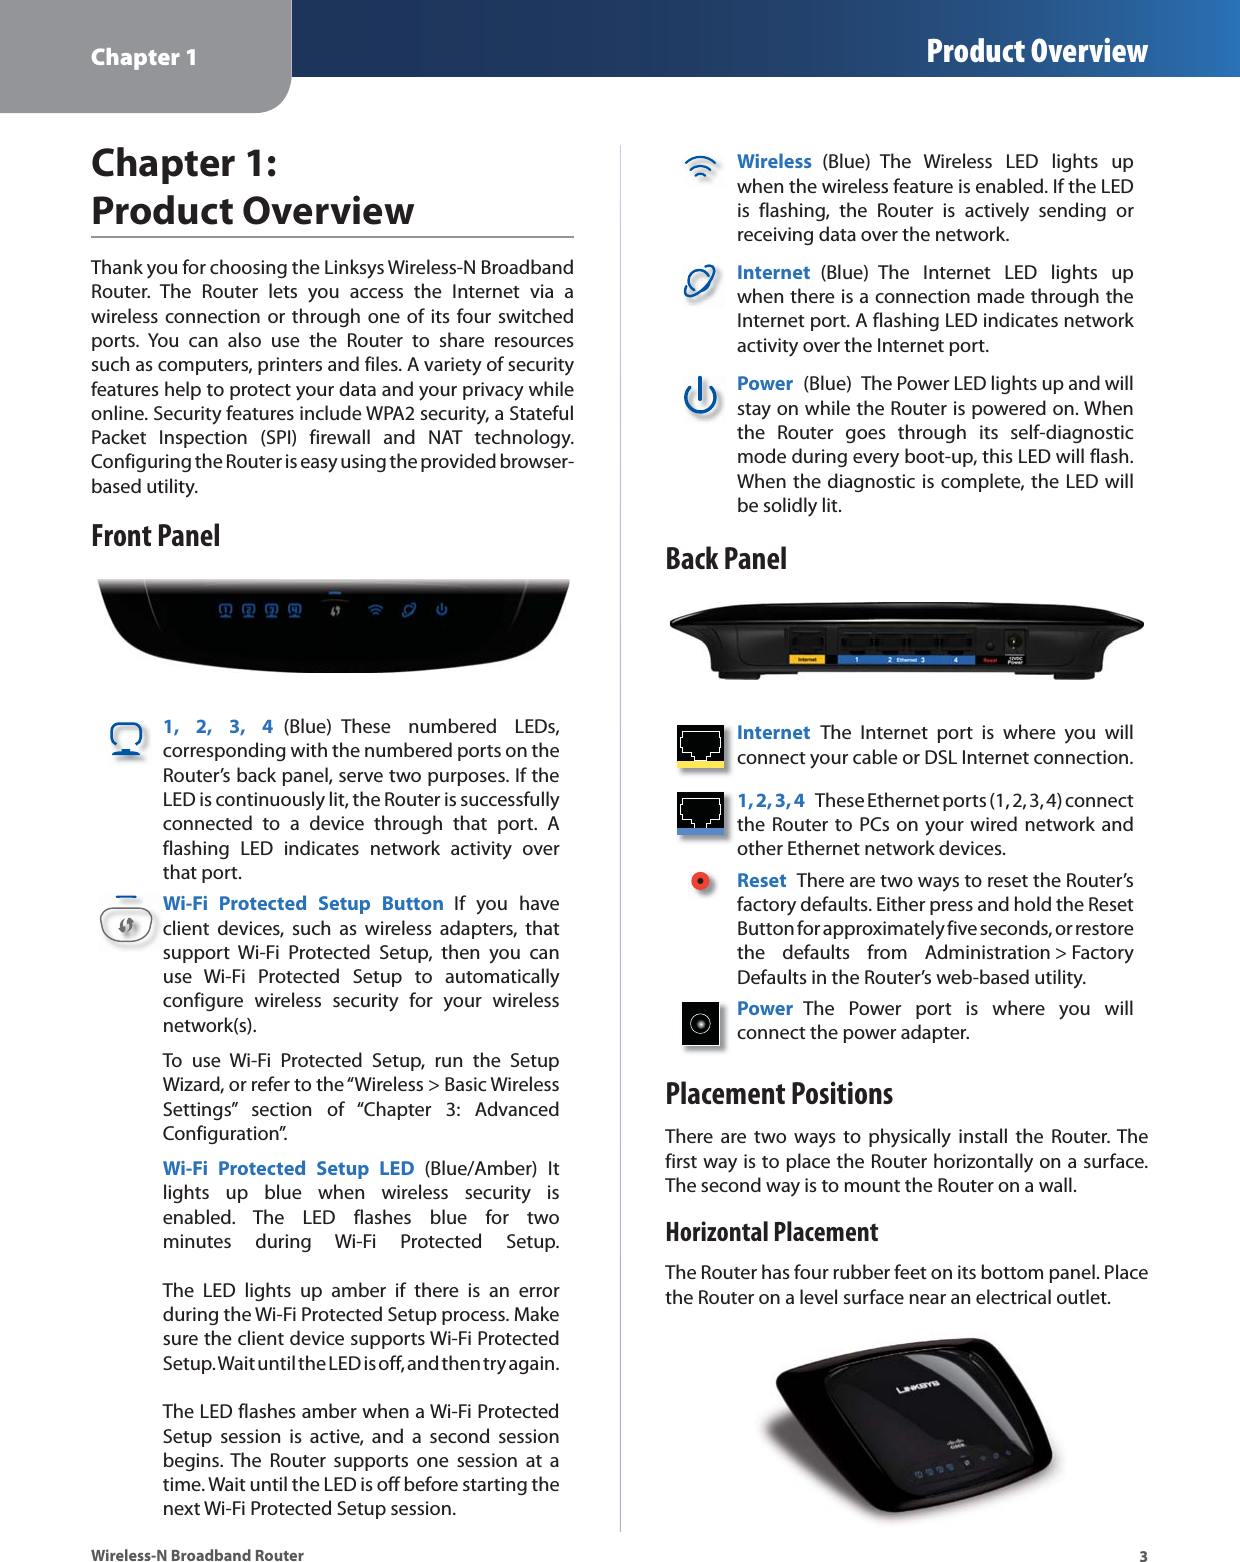 Chapter 1 Product Overview3Wireless-N Broadband RouterChapter 1: Product OverviewThank you for choosing the Linksys Wireless-N Broadband Router. The Router lets you access the Internet via a  wireless connection or through one of its four switched ports. You can also use the Router to share resources such as computers, printers and files. A variety of security features help to protect your data and your privacy while online. Security features include WPA2 security, a Stateful Packet Inspection (SPI) firewall and NAT technology. Configuring the Router is easy using the provided browser-based utility.Front Panel1, 2, 3, 4 (Blue) These numbered LEDs, corresponding with the numbered ports on the Router’s back panel, serve two purposes. If the LED is continuously lit, the Router is successfully connected to a device through that port. A flashing LED indicates network activity over that port.Wi-Fi Protected Setup Button If you have client devices, such as wireless adapters, that support Wi-Fi Protected Setup, then you can use Wi-Fi Protected Setup to automatically configure wireless security for your wireless network(s).To use Wi-Fi Protected Setup, run the Setup Wizard, or refer to the “Wireless &gt; Basic Wireless Settings” section of “Chapter 3: Advanced Configuration”.Wi-Fi Protected Setup LED (Blue/Amber) It lights up blue when wireless security is enabled. The LED flashes blue for two minutes during Wi-Fi Protected Setup.    The LED lights up amber if there is an error during the Wi-Fi Protected Setup process. Make sure the client device supports Wi-Fi Protected Setup. Wait until the LED is off, and then try again.   The LED flashes amber when a Wi-Fi Protected Setup session is active, and a second session begins. The Router supports one session at a time. Wait until the LED is off before starting the next Wi-Fi Protected Setup session.Wireless  (Blue) The Wireless LED lights up when the wireless feature is enabled. If the LED is flashing, the Router is actively sending or receiving data over the network.Internet  (Blue) The Internet LED lights up when there is a connection made through the Internet port. A flashing LED indicates network activity over the Internet port.Power  (Blue)  The Power LED lights up and will stay on while the Router is powered on. When the Router goes through its self-diagnostic mode during every boot-up, this LED will flash. When the diagnostic is complete, the LED will be solidly lit.Back PanelInternet  The Internet port is where you will connect your cable or DSL Internet connection. 1, 2, 3, 4  These Ethernet ports (1, 2, 3, 4) connect the Router to PCs on your wired network and other Ethernet network devices. Reset  There are two ways to reset the Router’s factory defaults. Either press and hold the Reset Button for approximately five seconds, or restore the defaults from Administration &gt; Factory Defaults in the Router’s web-based utility. Power  The Power port is where you will  connect the power adapter.Placement PositionsThere are two ways to physically install the Router. The first way is to place the Router horizontally on a surface. The second way is to mount the Router on a wall.Horizontal PlacementThe Router has four rubber feet on its bottom panel. Place the Router on a level surface near an electrical outlet.